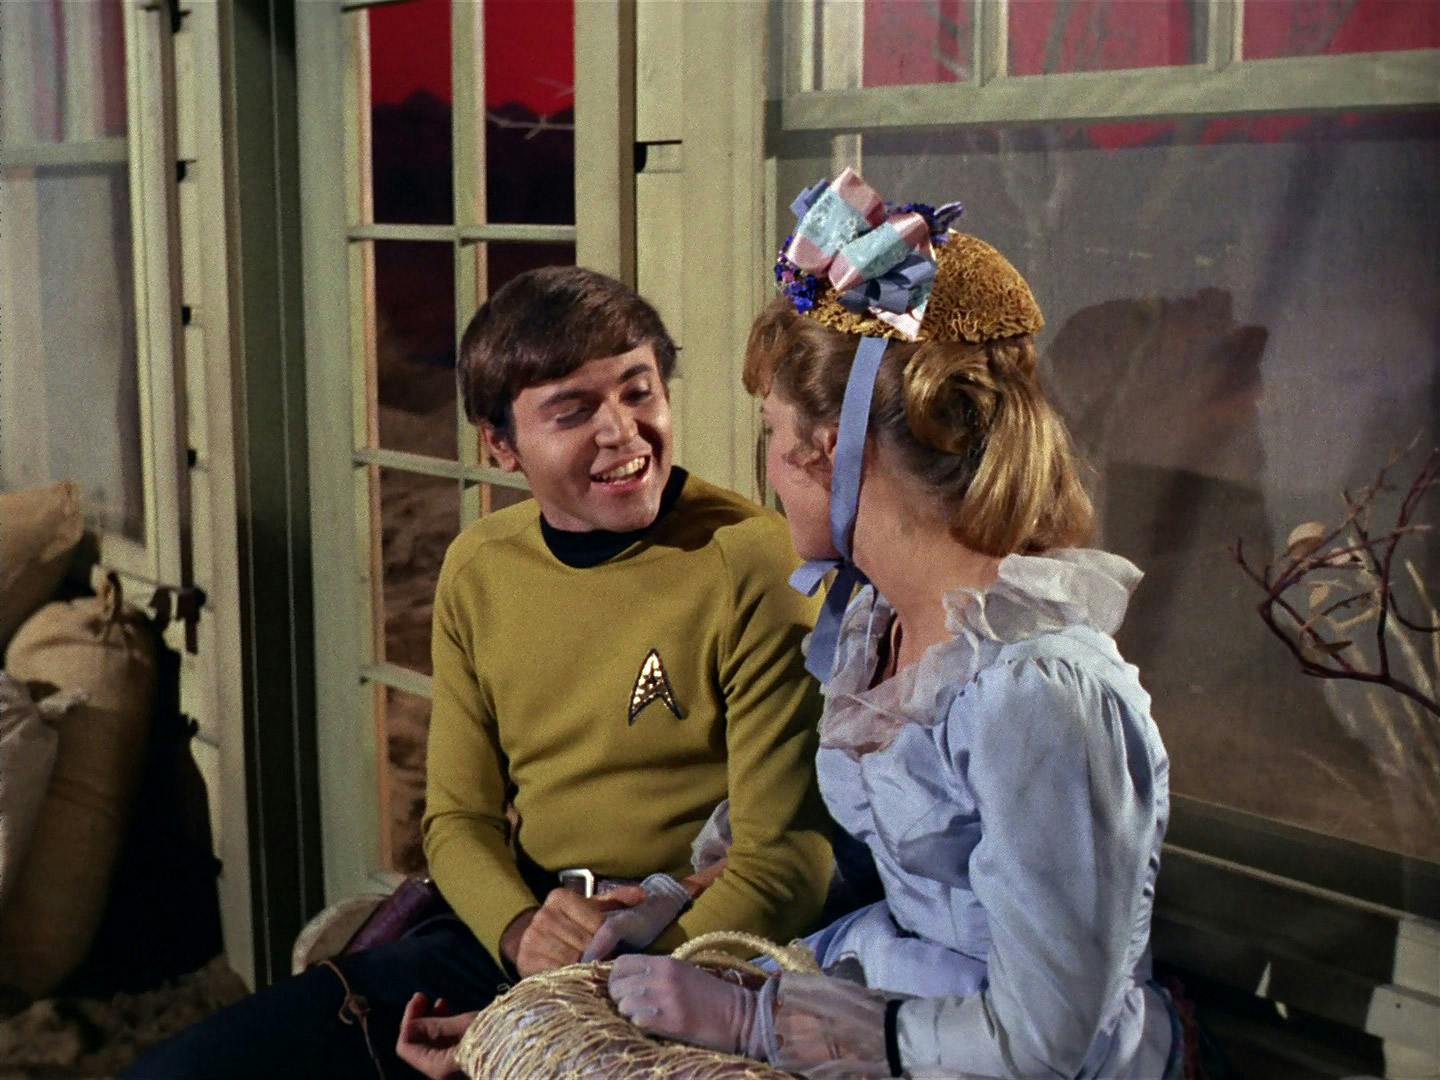 Outside of the bar, Chekov as Billy Claiborne and Sylvia enjoy a romantic interlude while clasping hands in 'Spectre of the Gun'